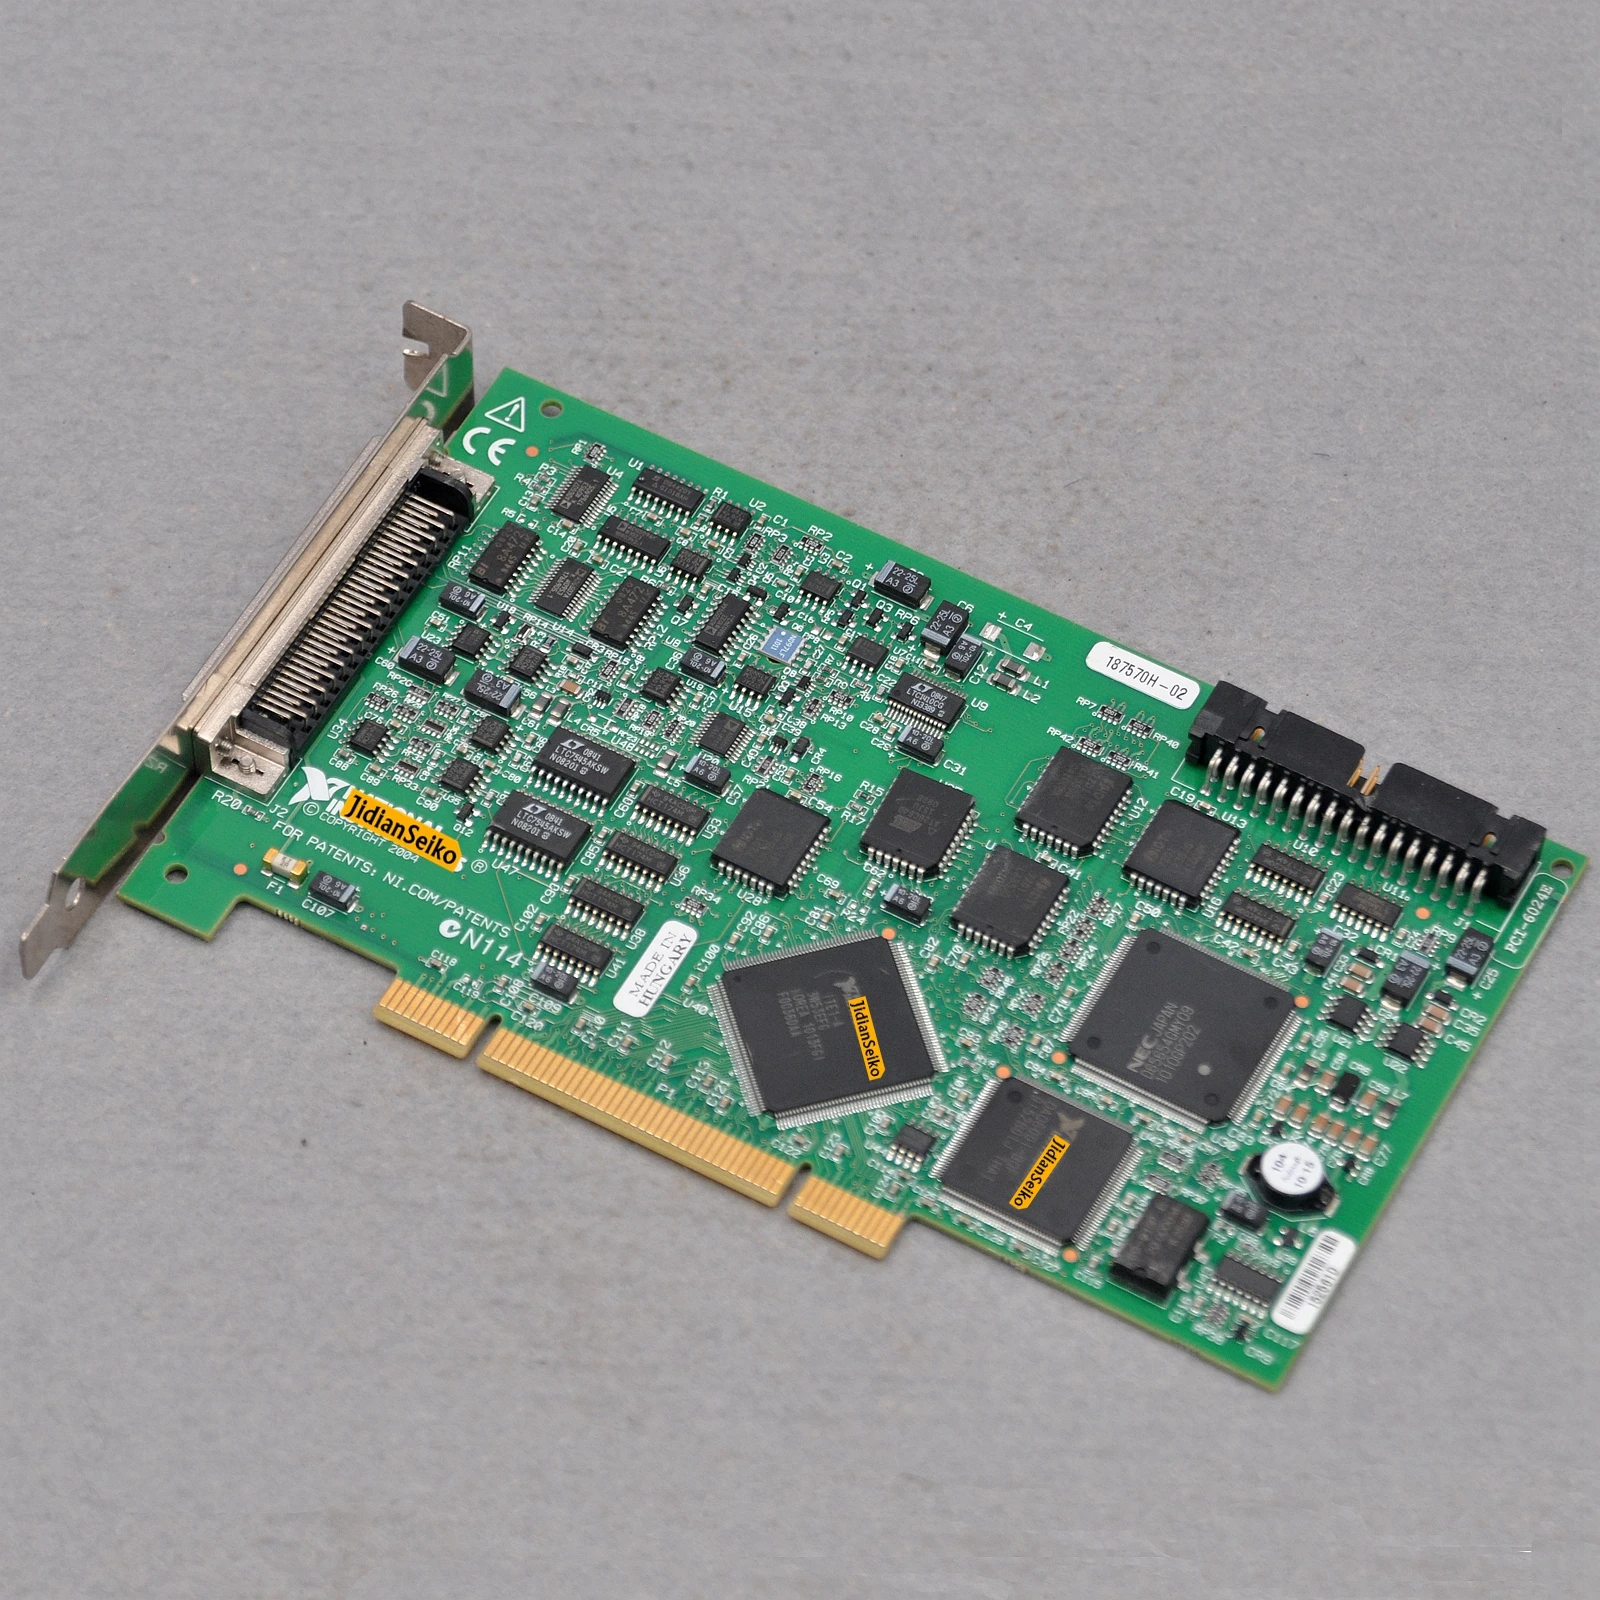 American data acquisition PCI-6024E communication letter analog input multi-function COPYRIGHT 2000 second-hand